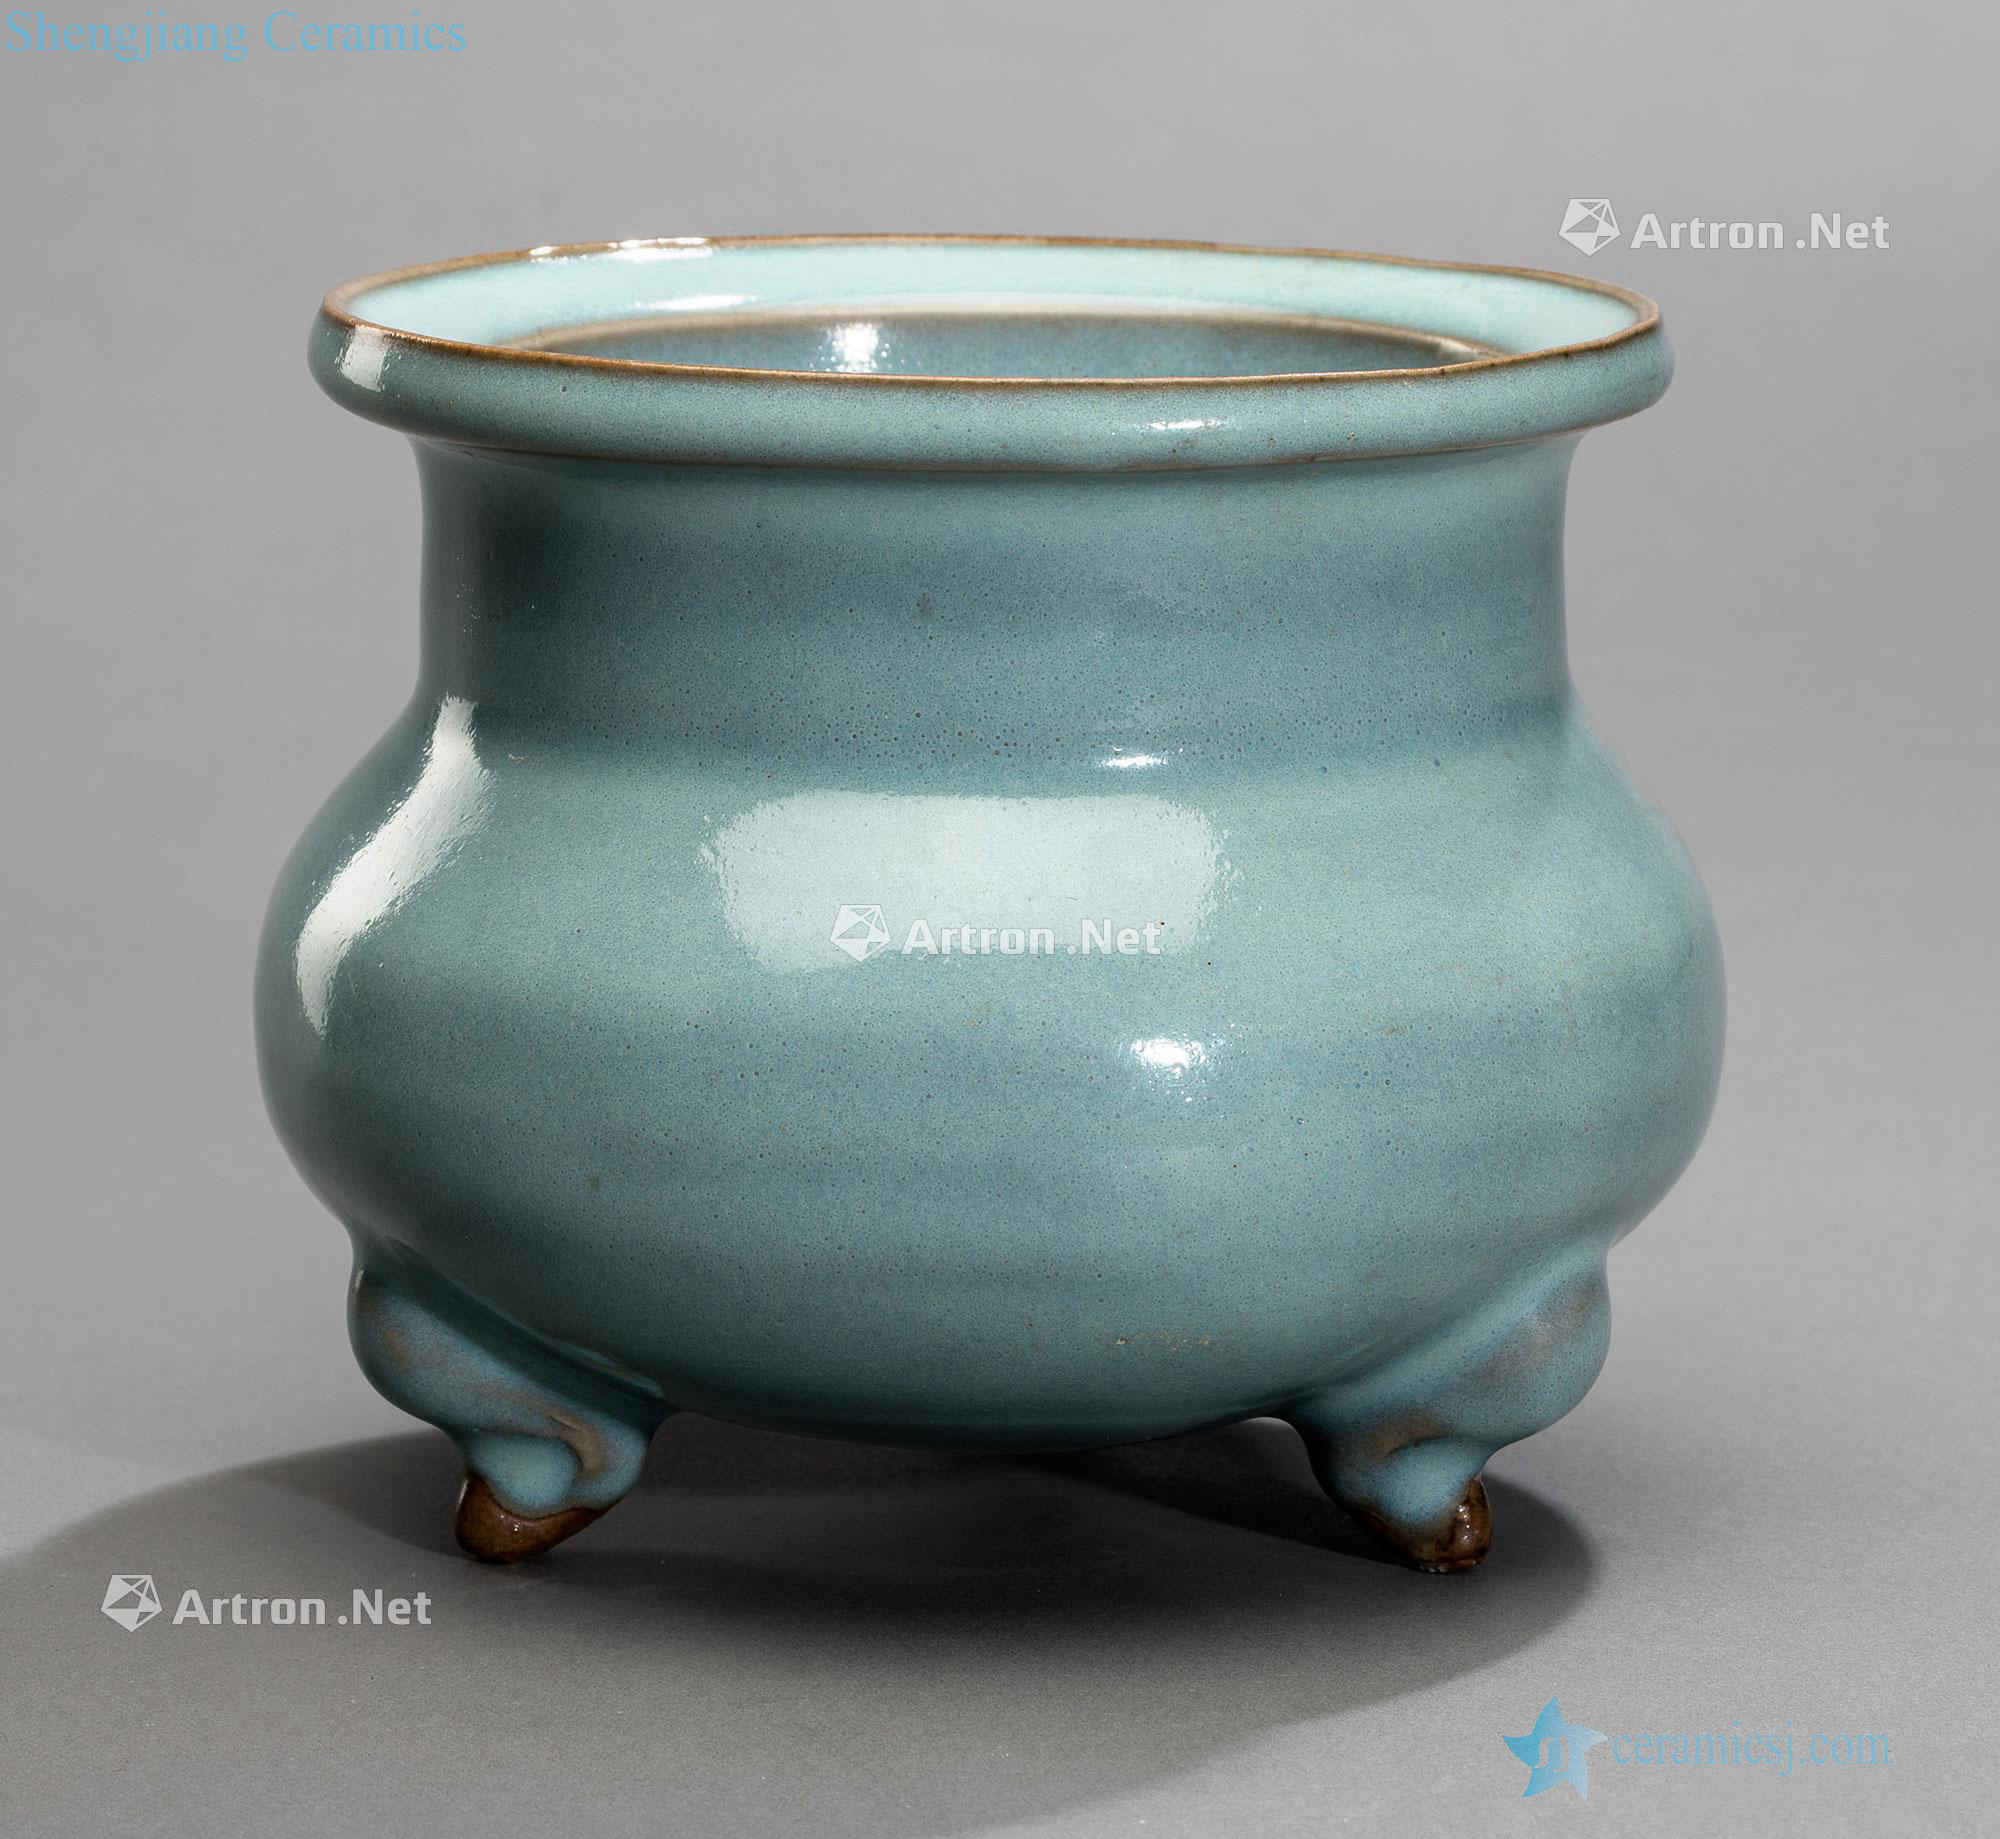 The yuan dynasty/fine blue purple glaze censer masterpieces in early Ming dynasty